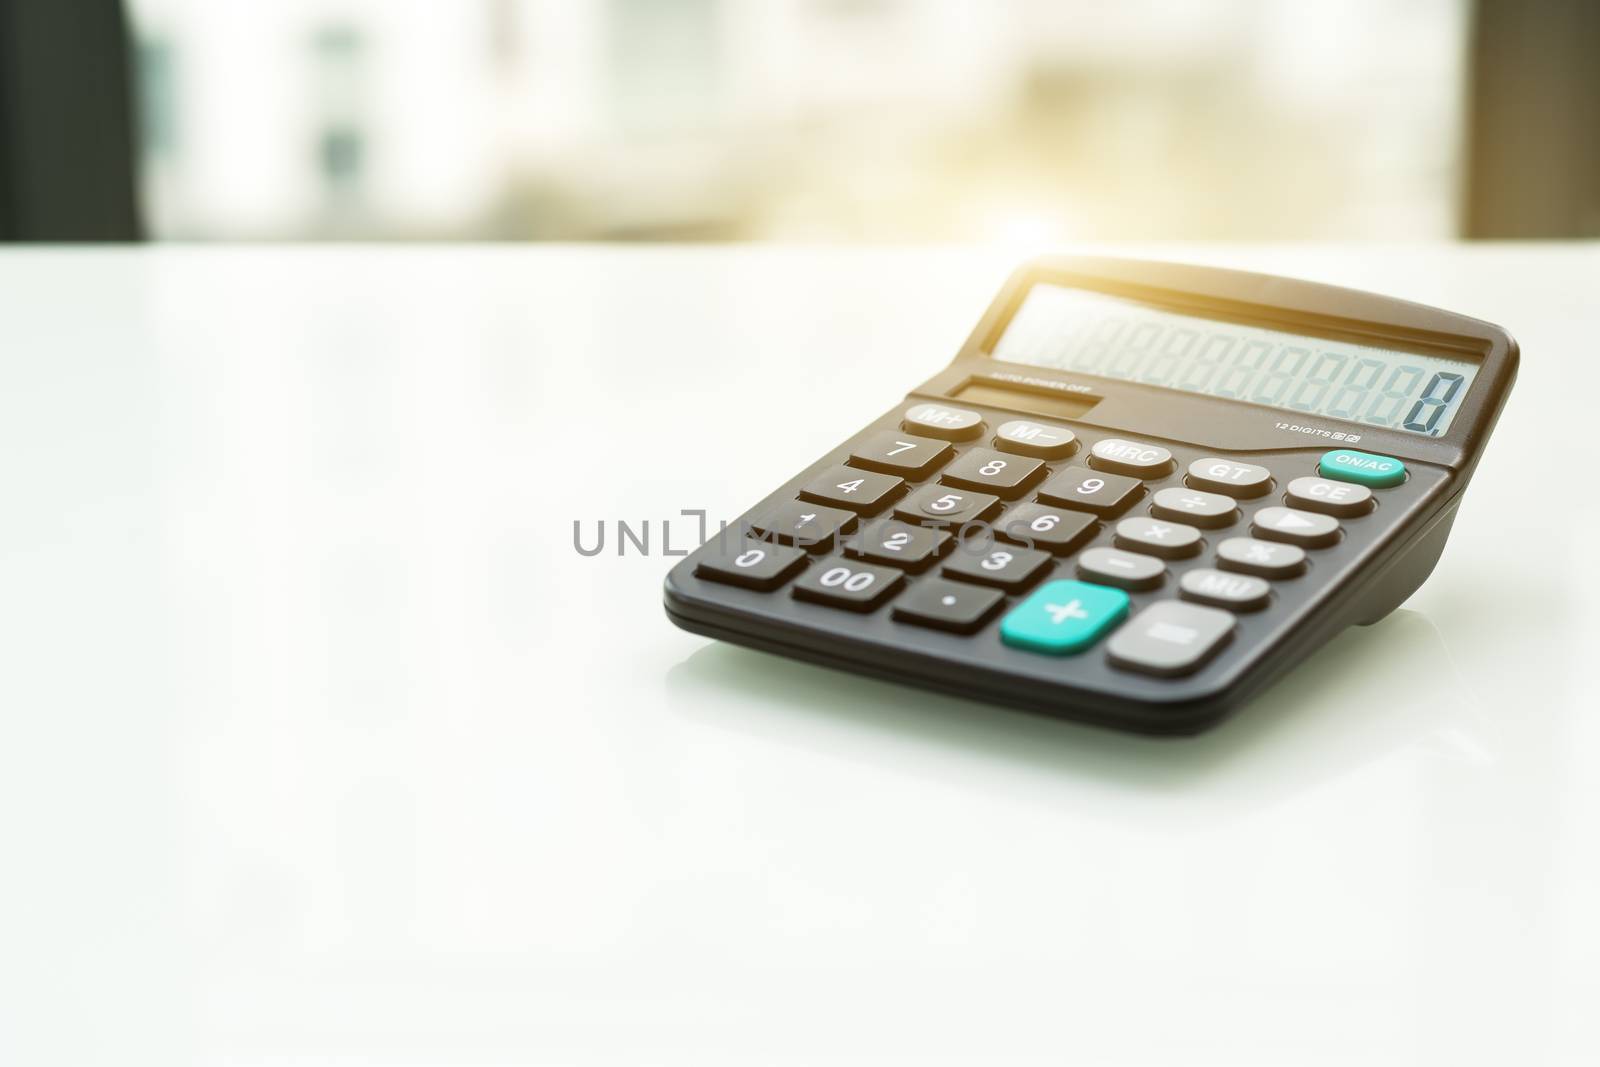 Calculator on the white table near window, sideview isolated with flare filter